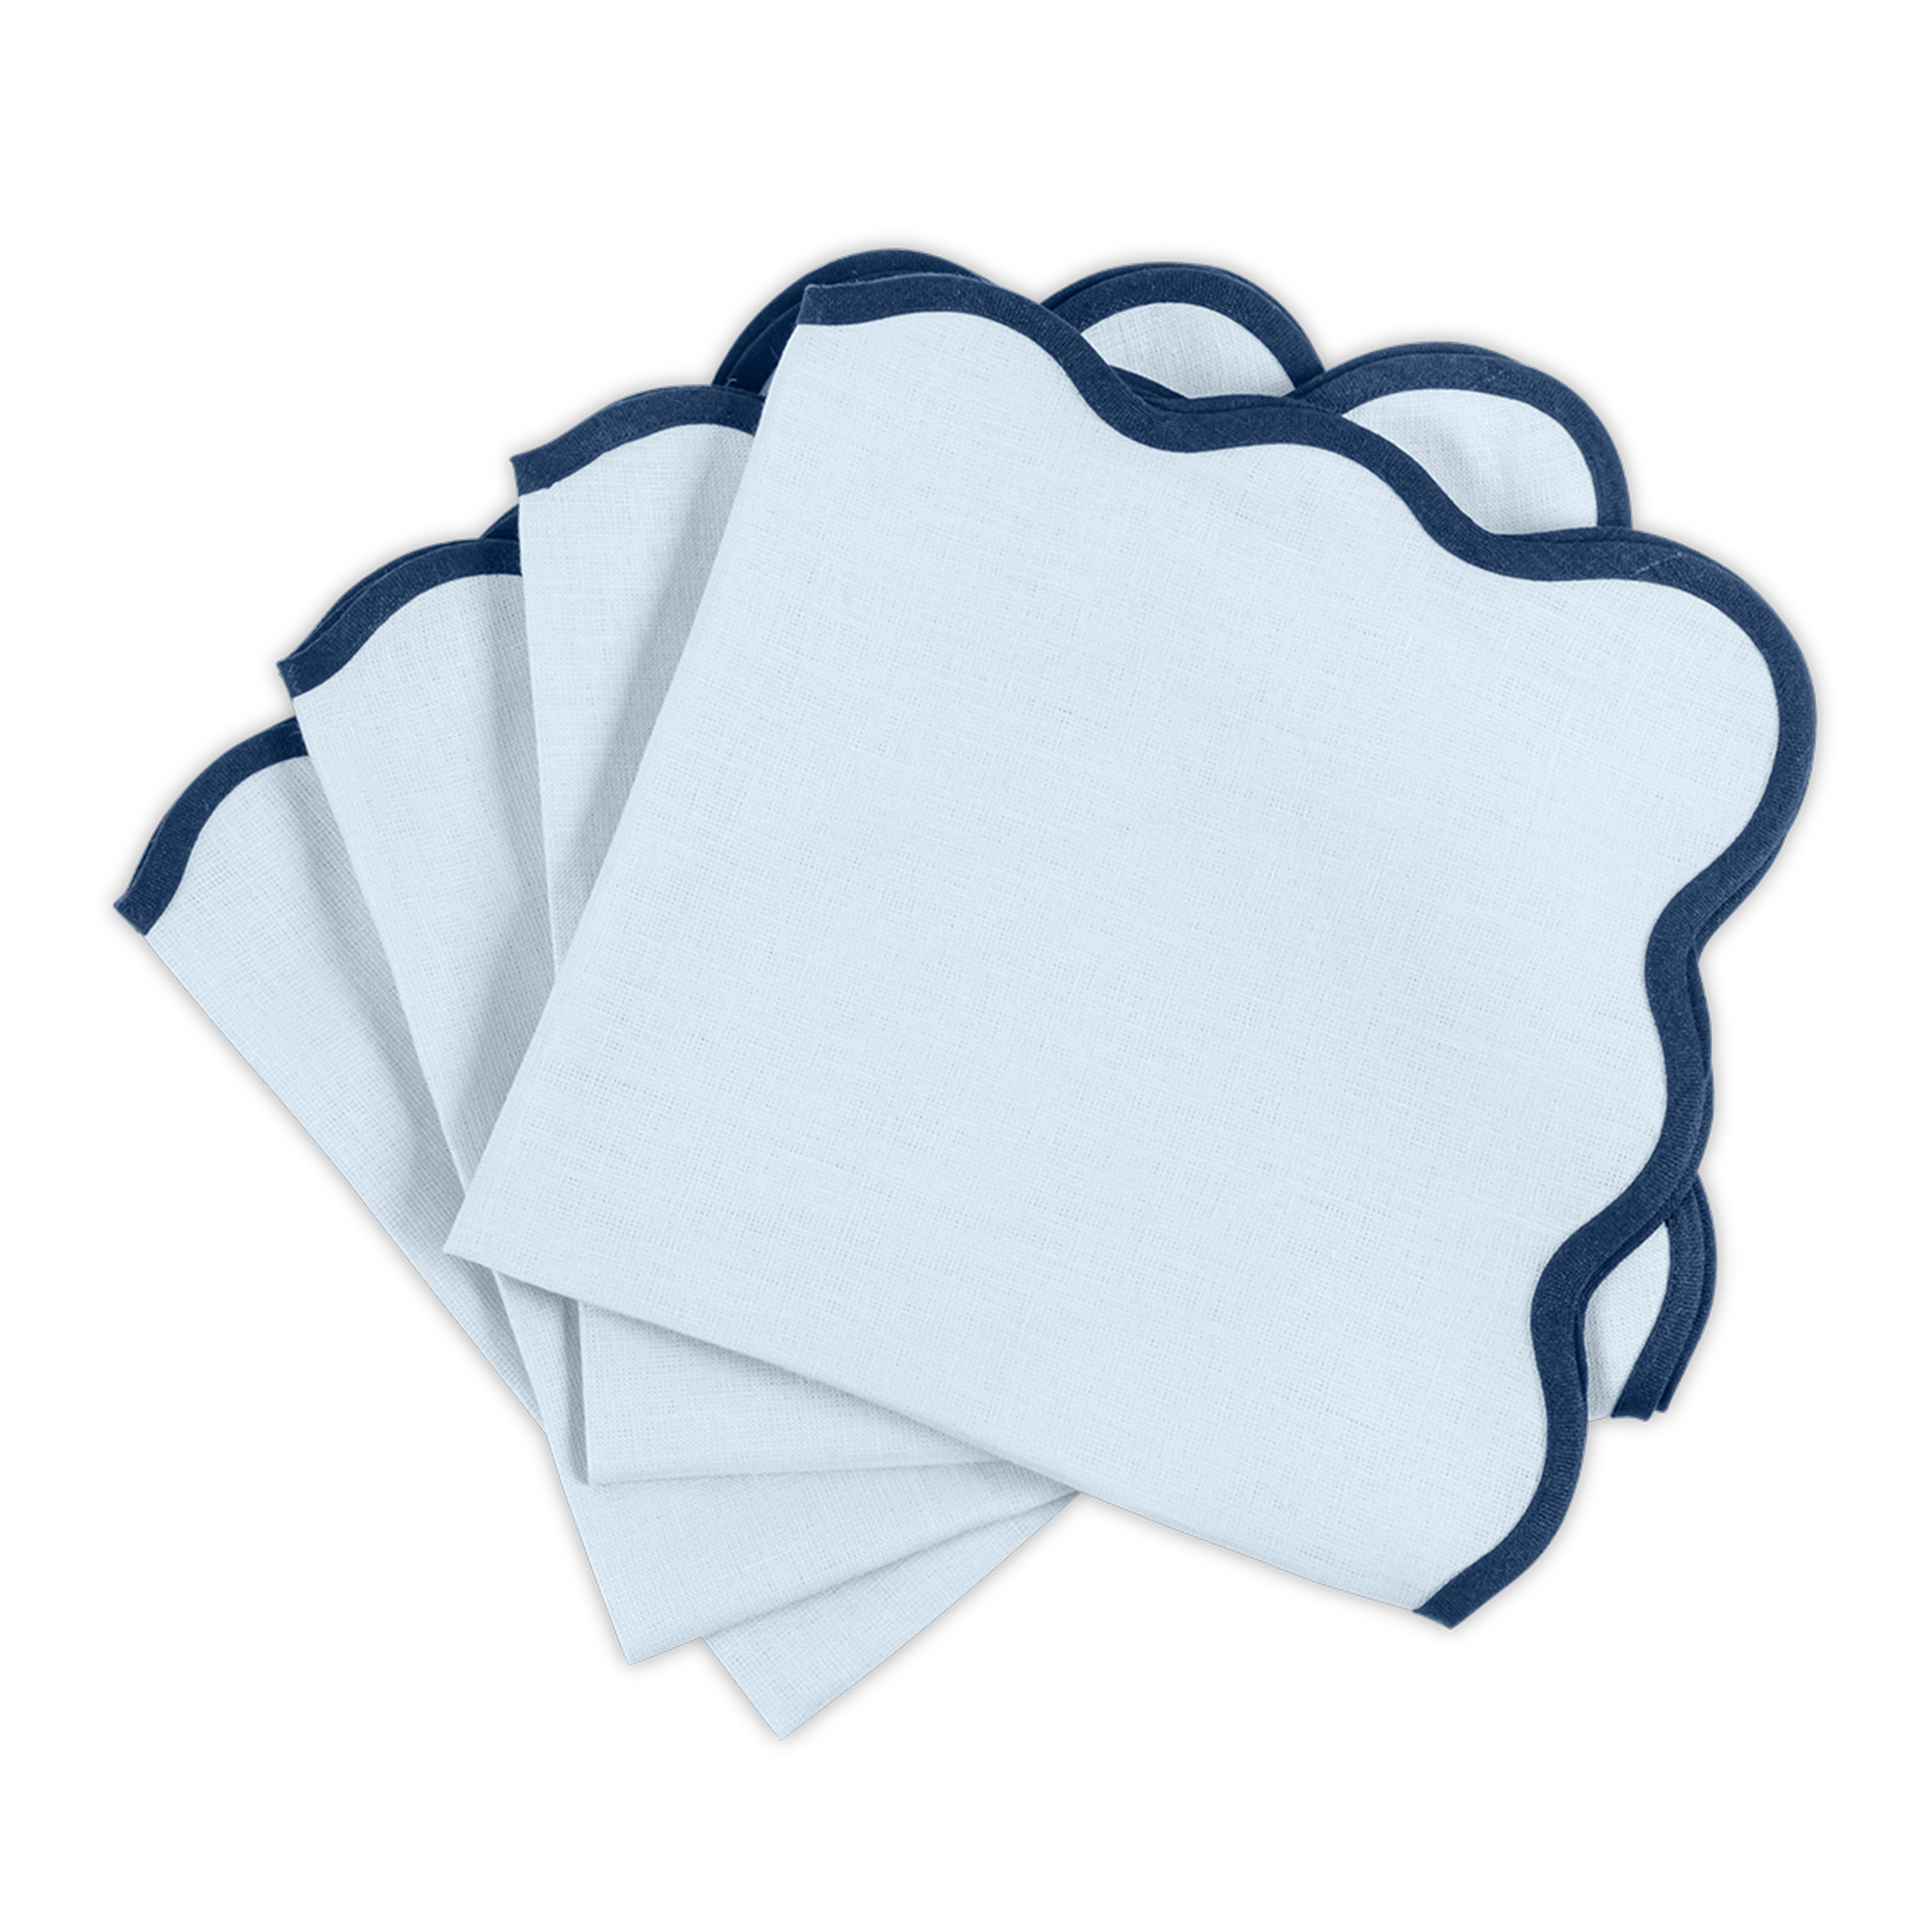 Dinner Napkins of Matouk Scallop Edge Table Linens in Color Ice Blue/Navy